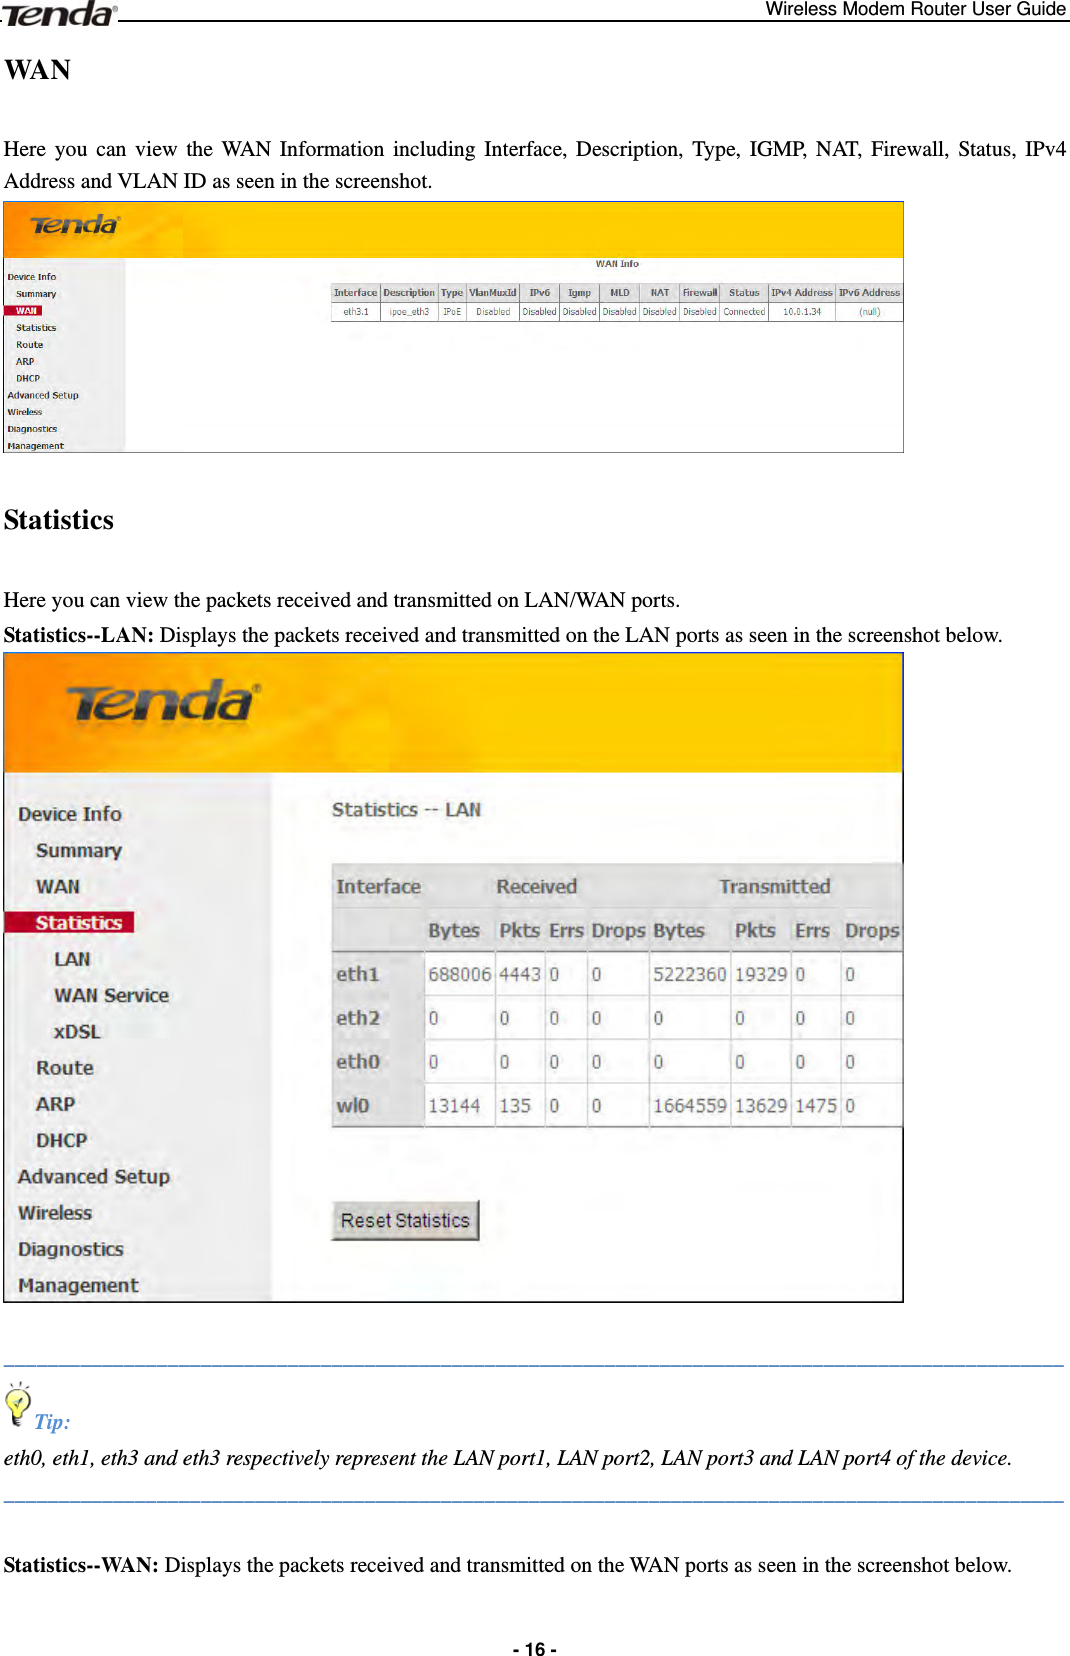 Wireless Modem Router User Guide  - 16 -WAN  Here you can view the WAN Information including Interface, Description, Type, IGMP, NAT, Firewall, Status, IPv4 Address and VLAN ID as seen in the screenshot.  Statistics  Here you can view the packets received and transmitted on LAN/WAN ports. Statistics--LAN: Displays the packets received and transmitted on the LAN ports as seen in the screenshot below.   _________________________________________________________________________________________________ Tip: eth0, eth1, eth3 and eth3 respectively represent the LAN port1, LAN port2, LAN port3 and LAN port4 of the device. _________________________________________________________________________________________________  Statistics--WAN: Displays the packets received and transmitted on the WAN ports as seen in the screenshot below. 